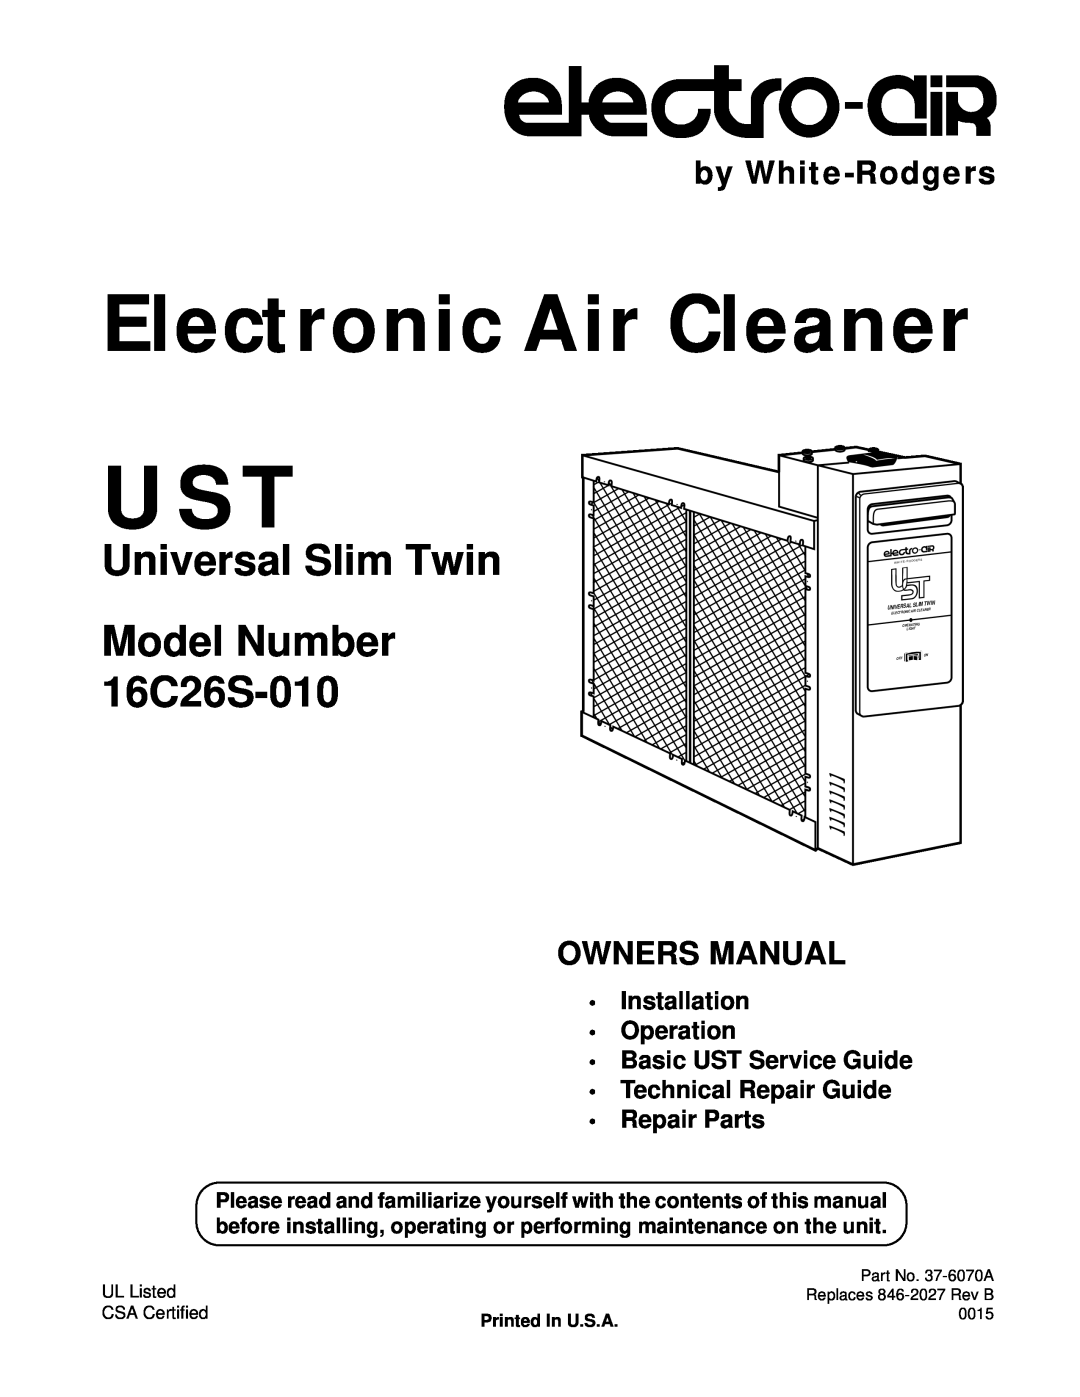 Emerson owner manual Universal Slim Twin Model Number 16C26S-010, by White-Rodgers, Electronic Air Cleaner, Operating 